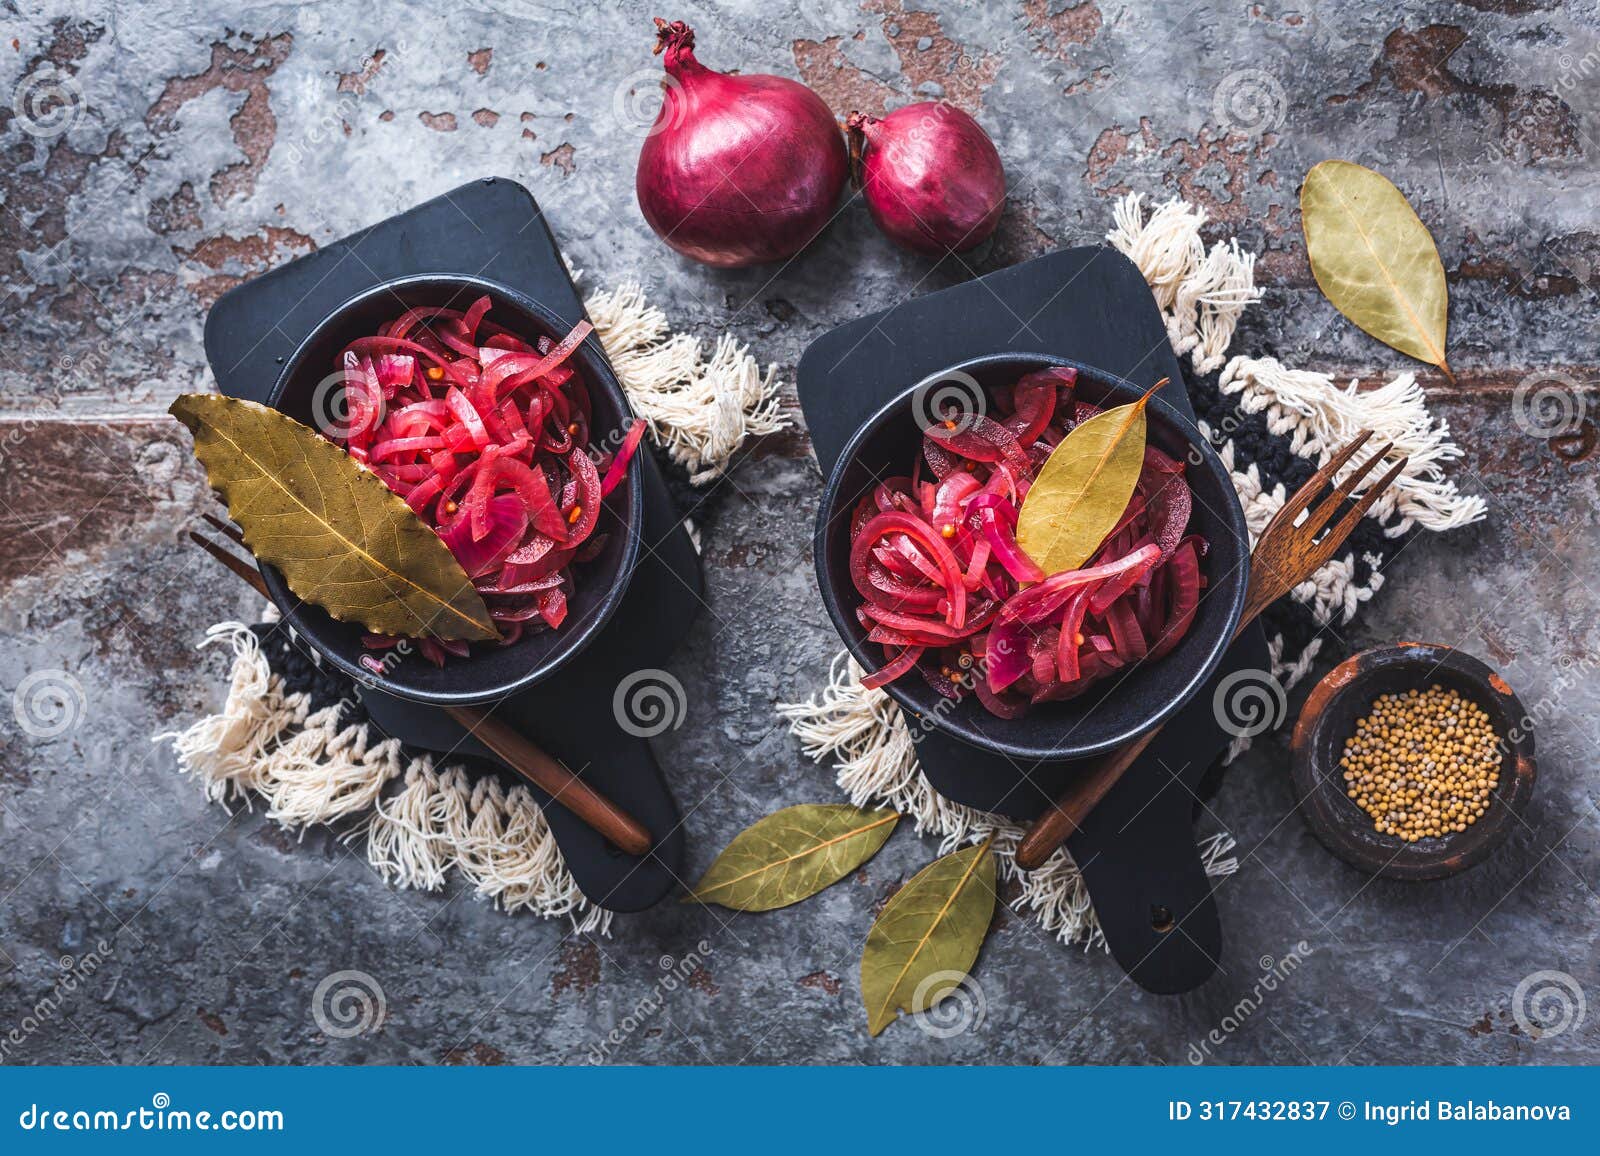 pickled red onions in bowl on a gray background. appetizer, condiment or topping, healthy fermented food